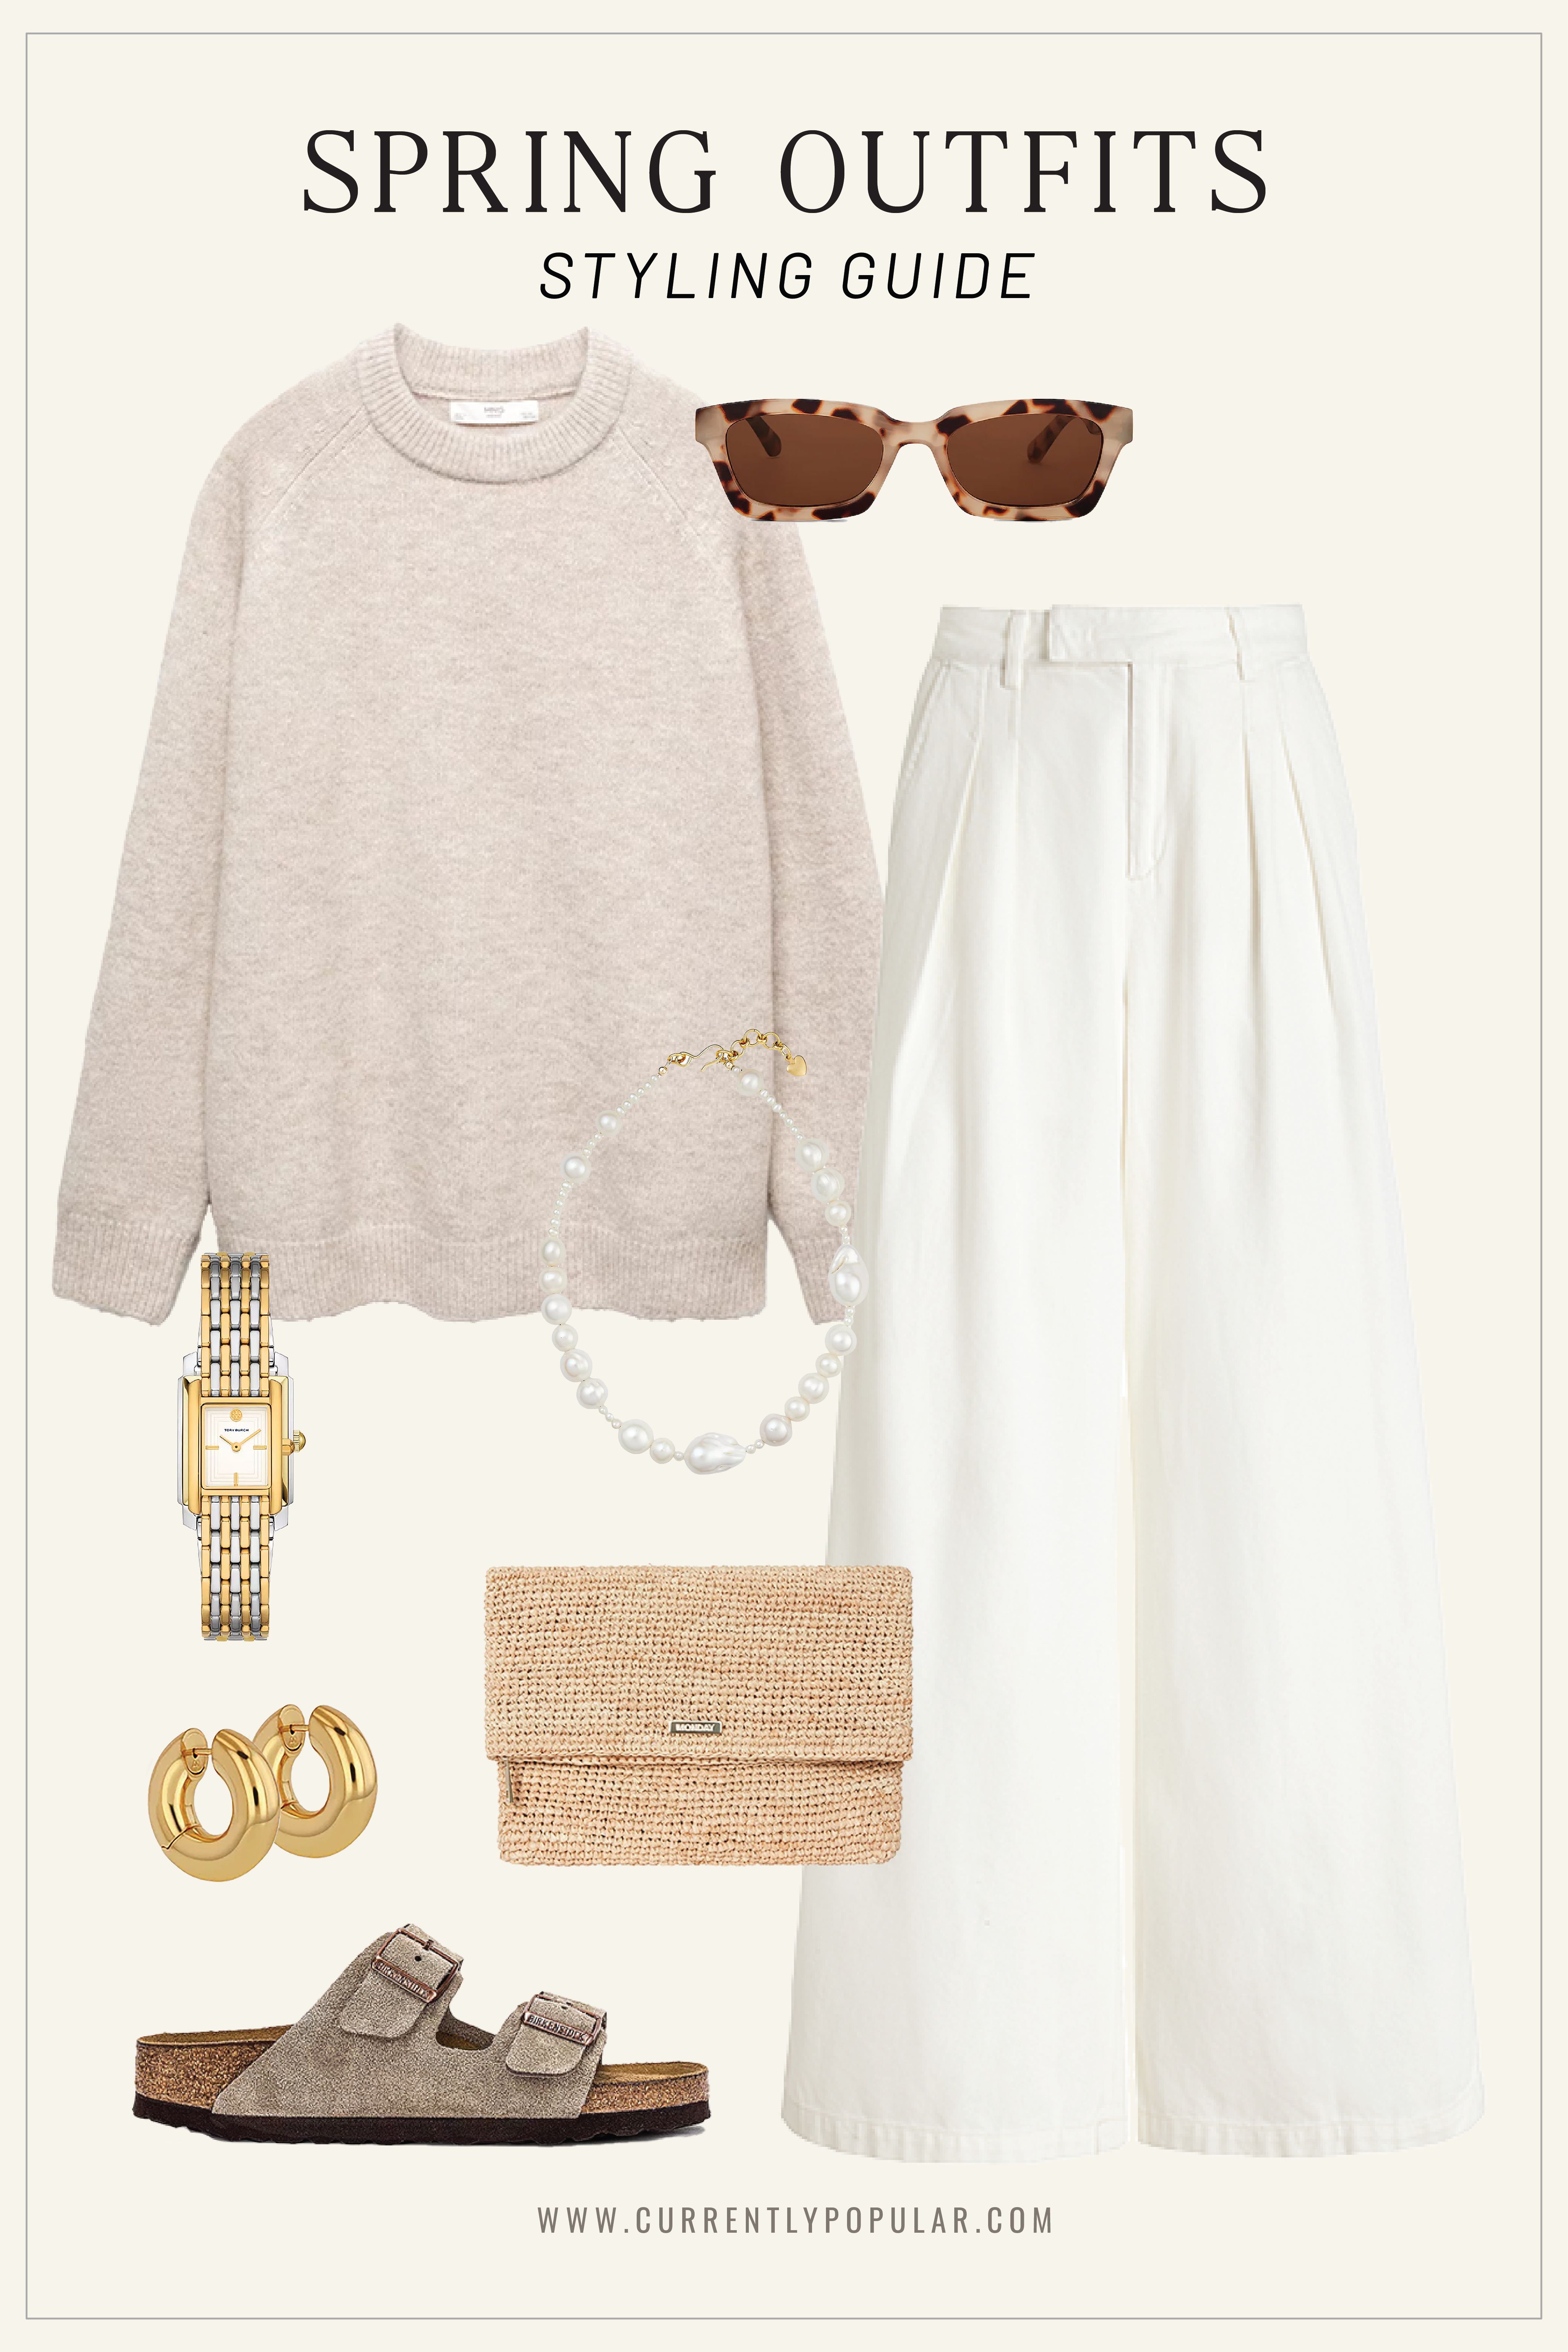 Casual Spring Outfit: Beige Sweater, White Palazzo Pants, Straw Clutch, Tortoiseshell Sunglasses.